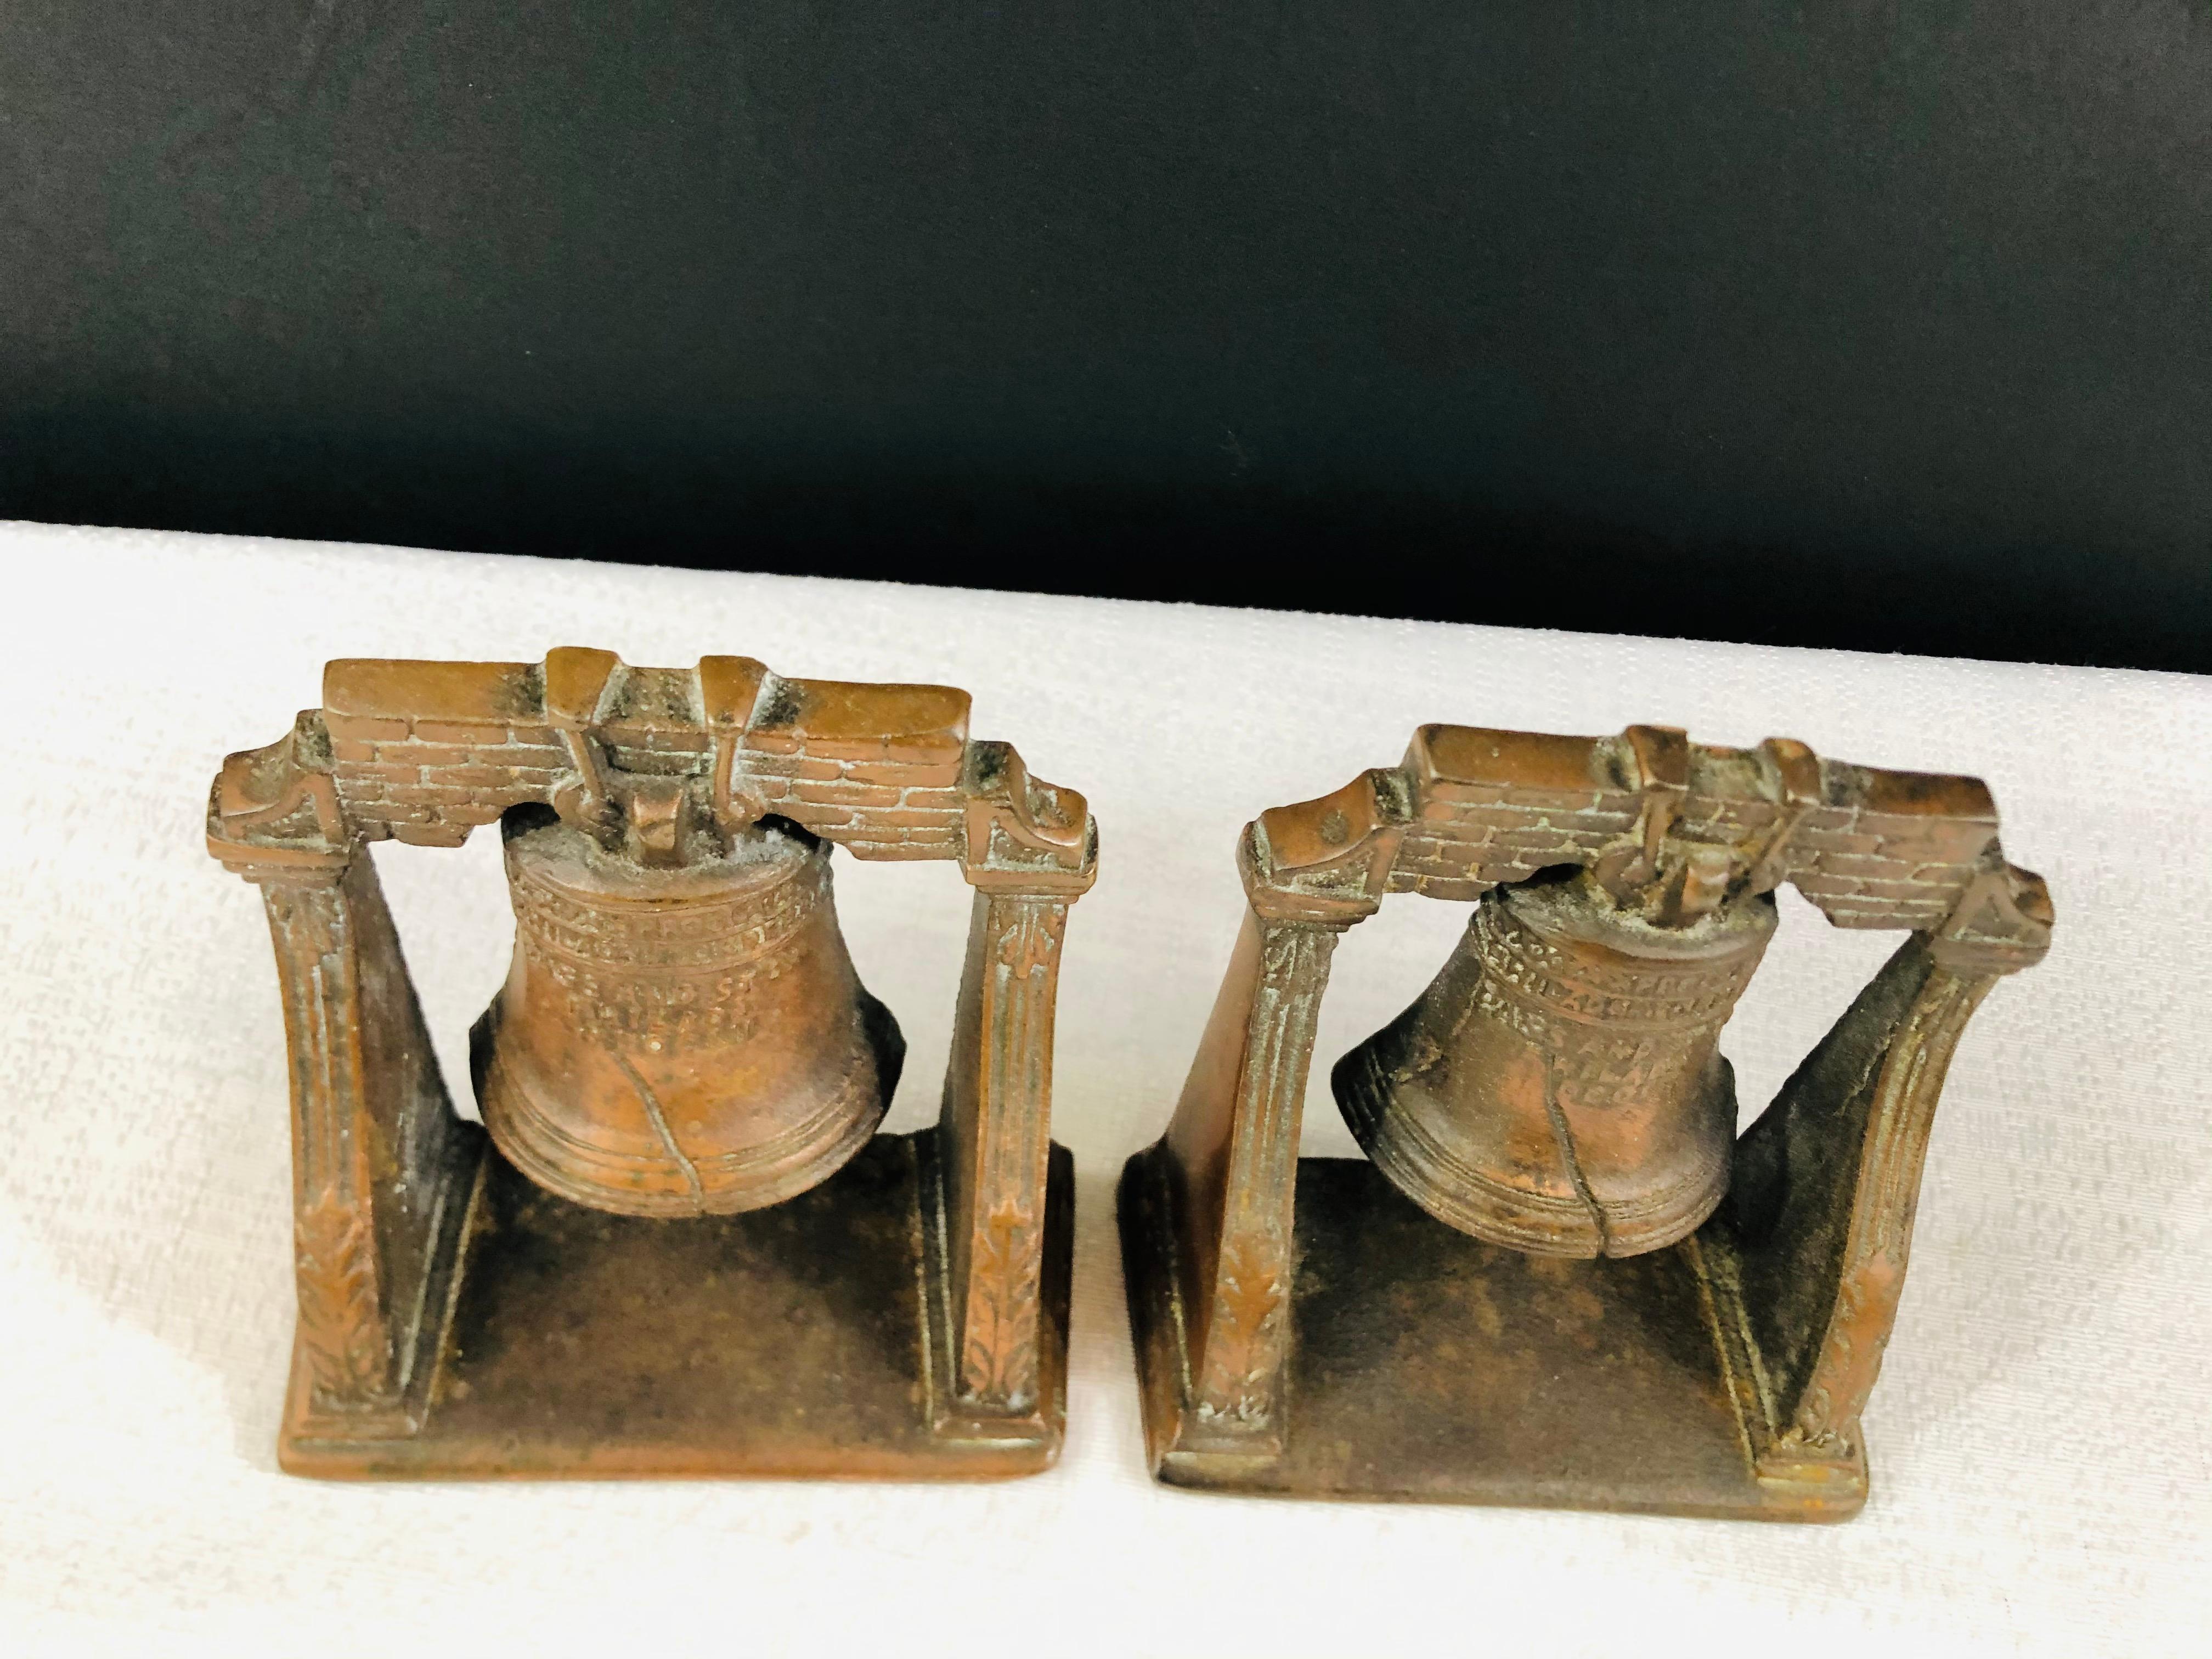 A decorative set of two antique cast bronze Mission bells sculptures. Each bell features fine details and engraving. 

Perfect to decorate your desk, study room or your living room shelves. 

Measures: 4.75